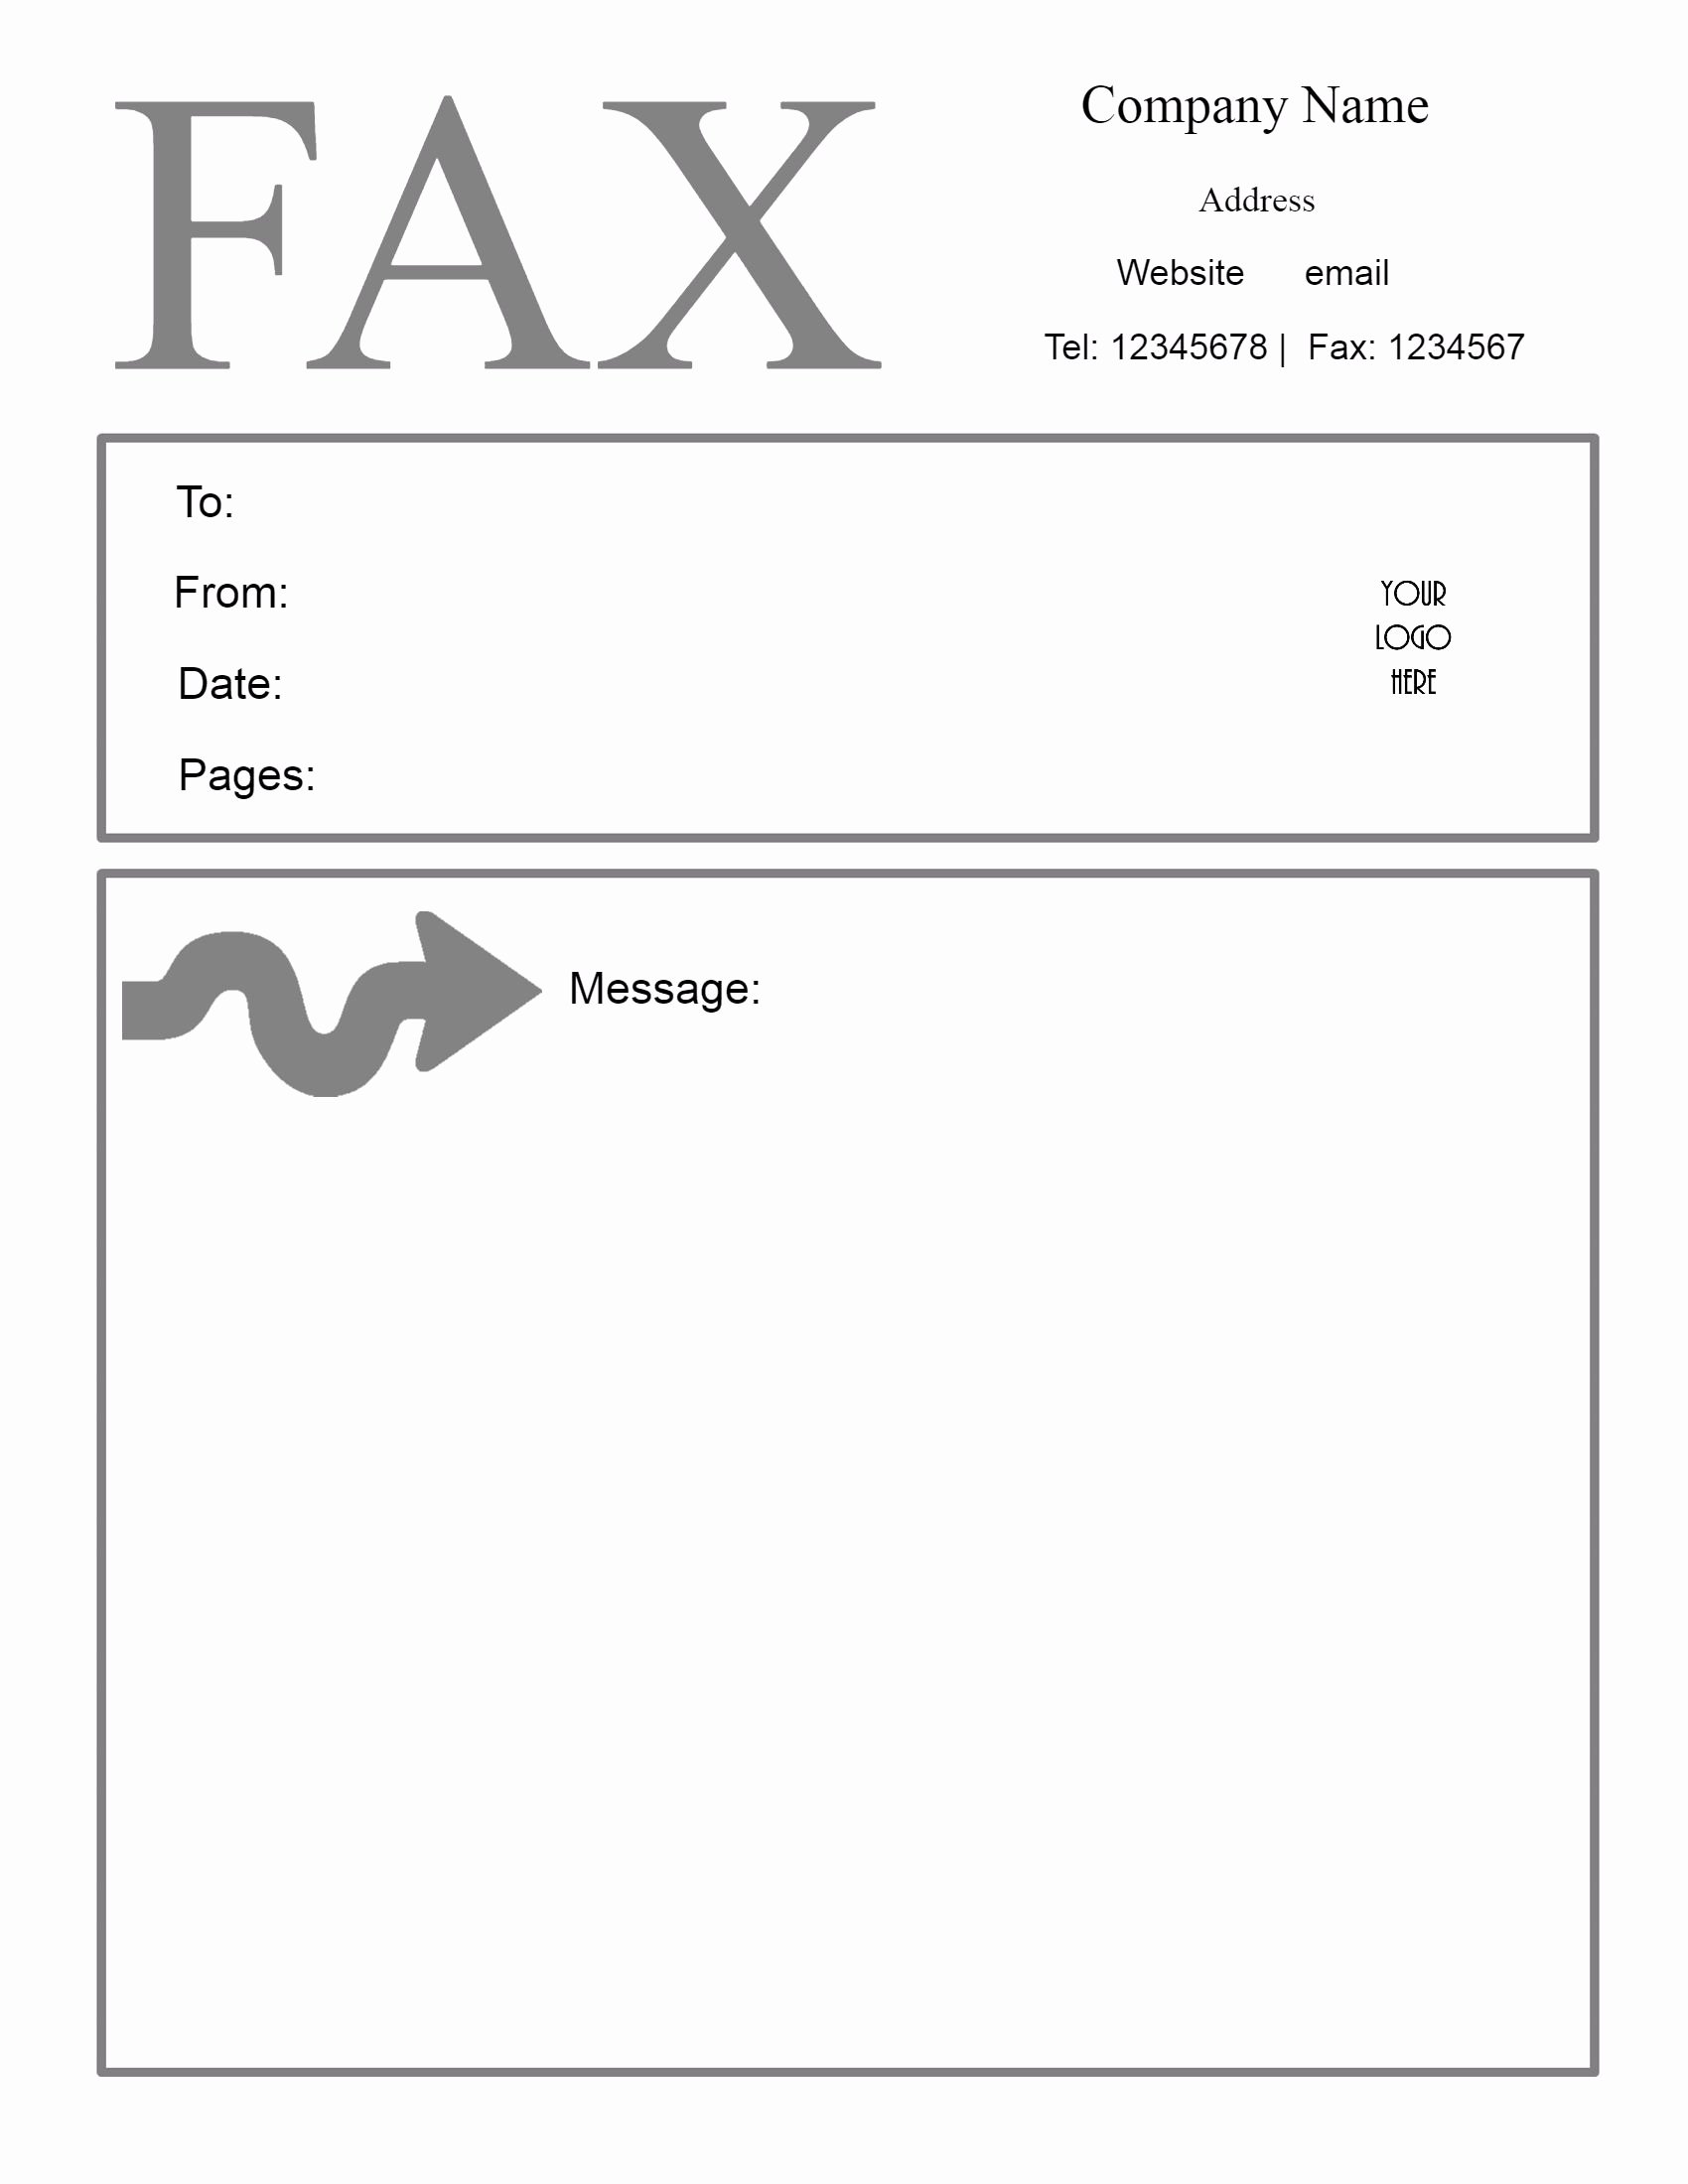 Fax Cover Sheet Word Template Unique Free Fax Cover Sheet Template